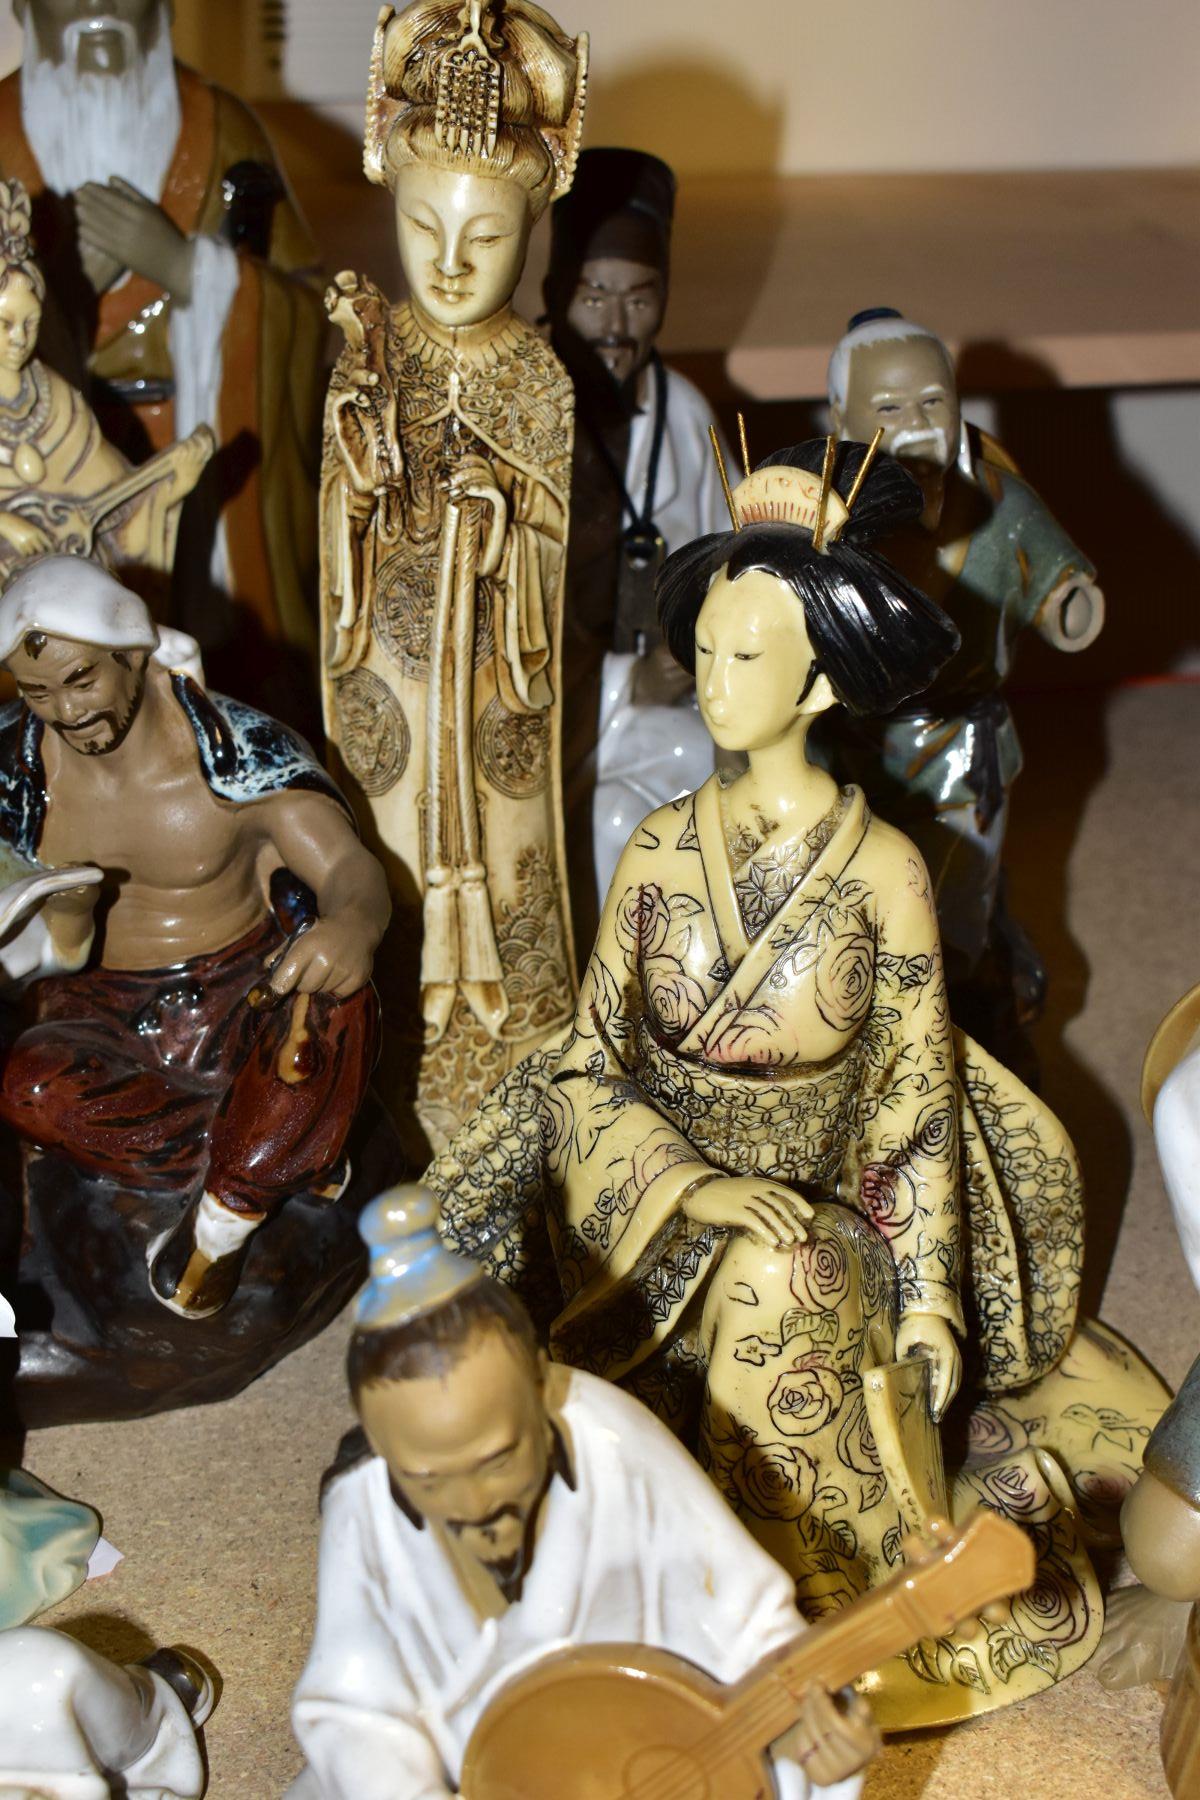 A GROUP OF MODERN ORIENTAL FIGURINES, to include fifteen figurines featuring people reading, fishing - Image 6 of 12